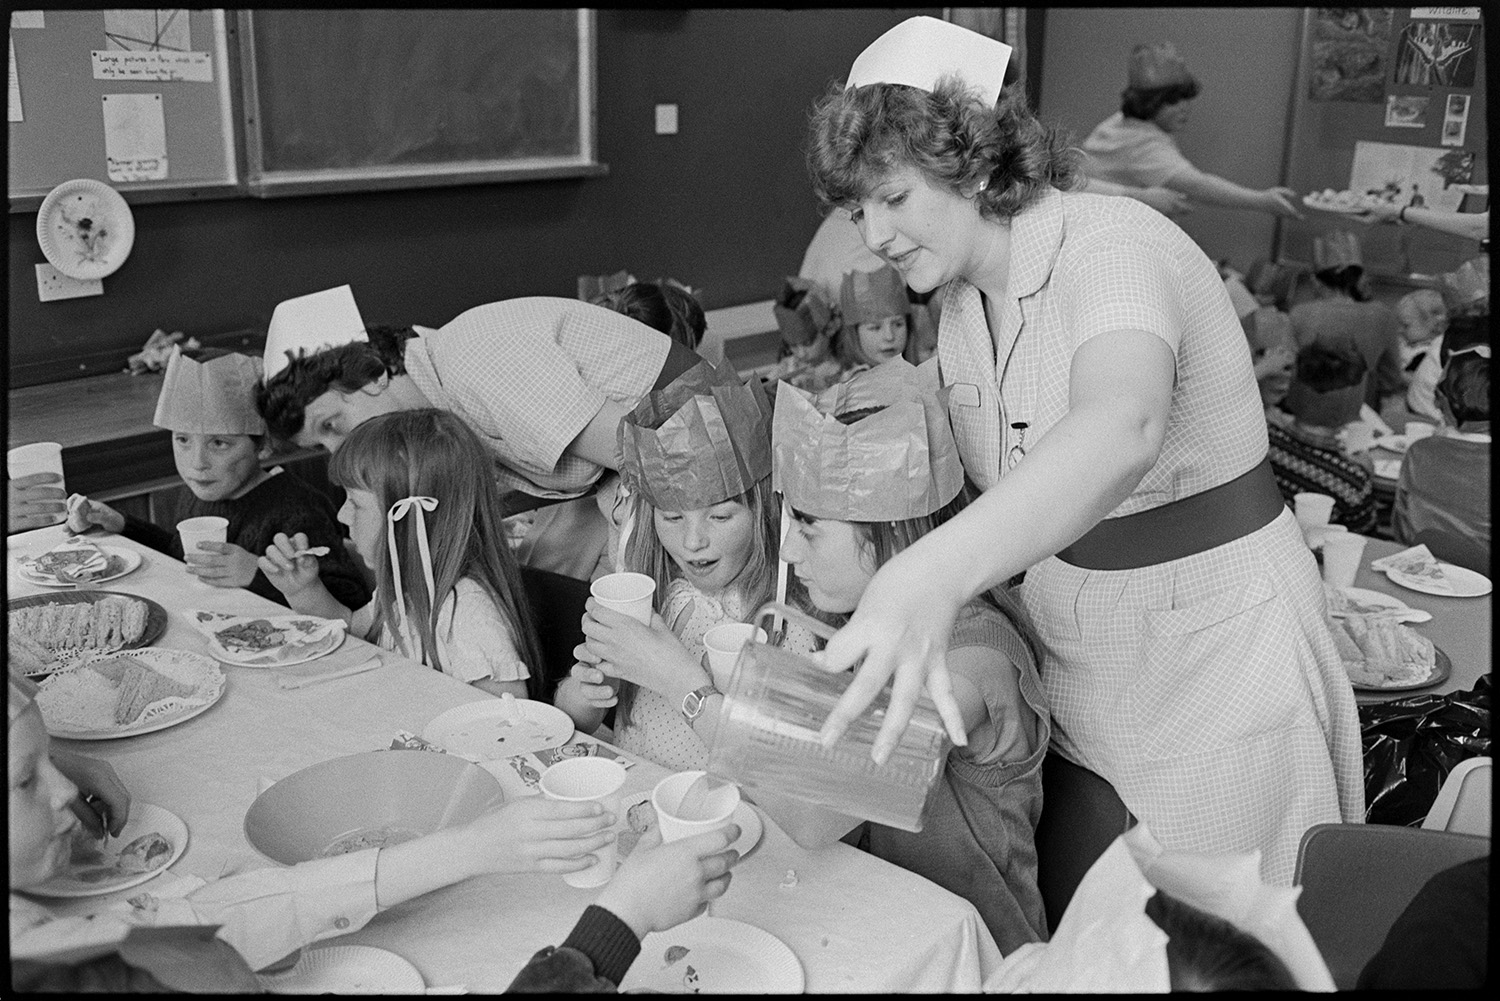 Party in children's ward of Hospital, food and drink served by nurses, buns, cakes. <br />
[Two nurses serving drinks and talking to children at a party on the Children's Ward at Barnstaple General Hospital. Some of the children are wearing paper hats. Cakes and sandwiches are laid out on the table.]